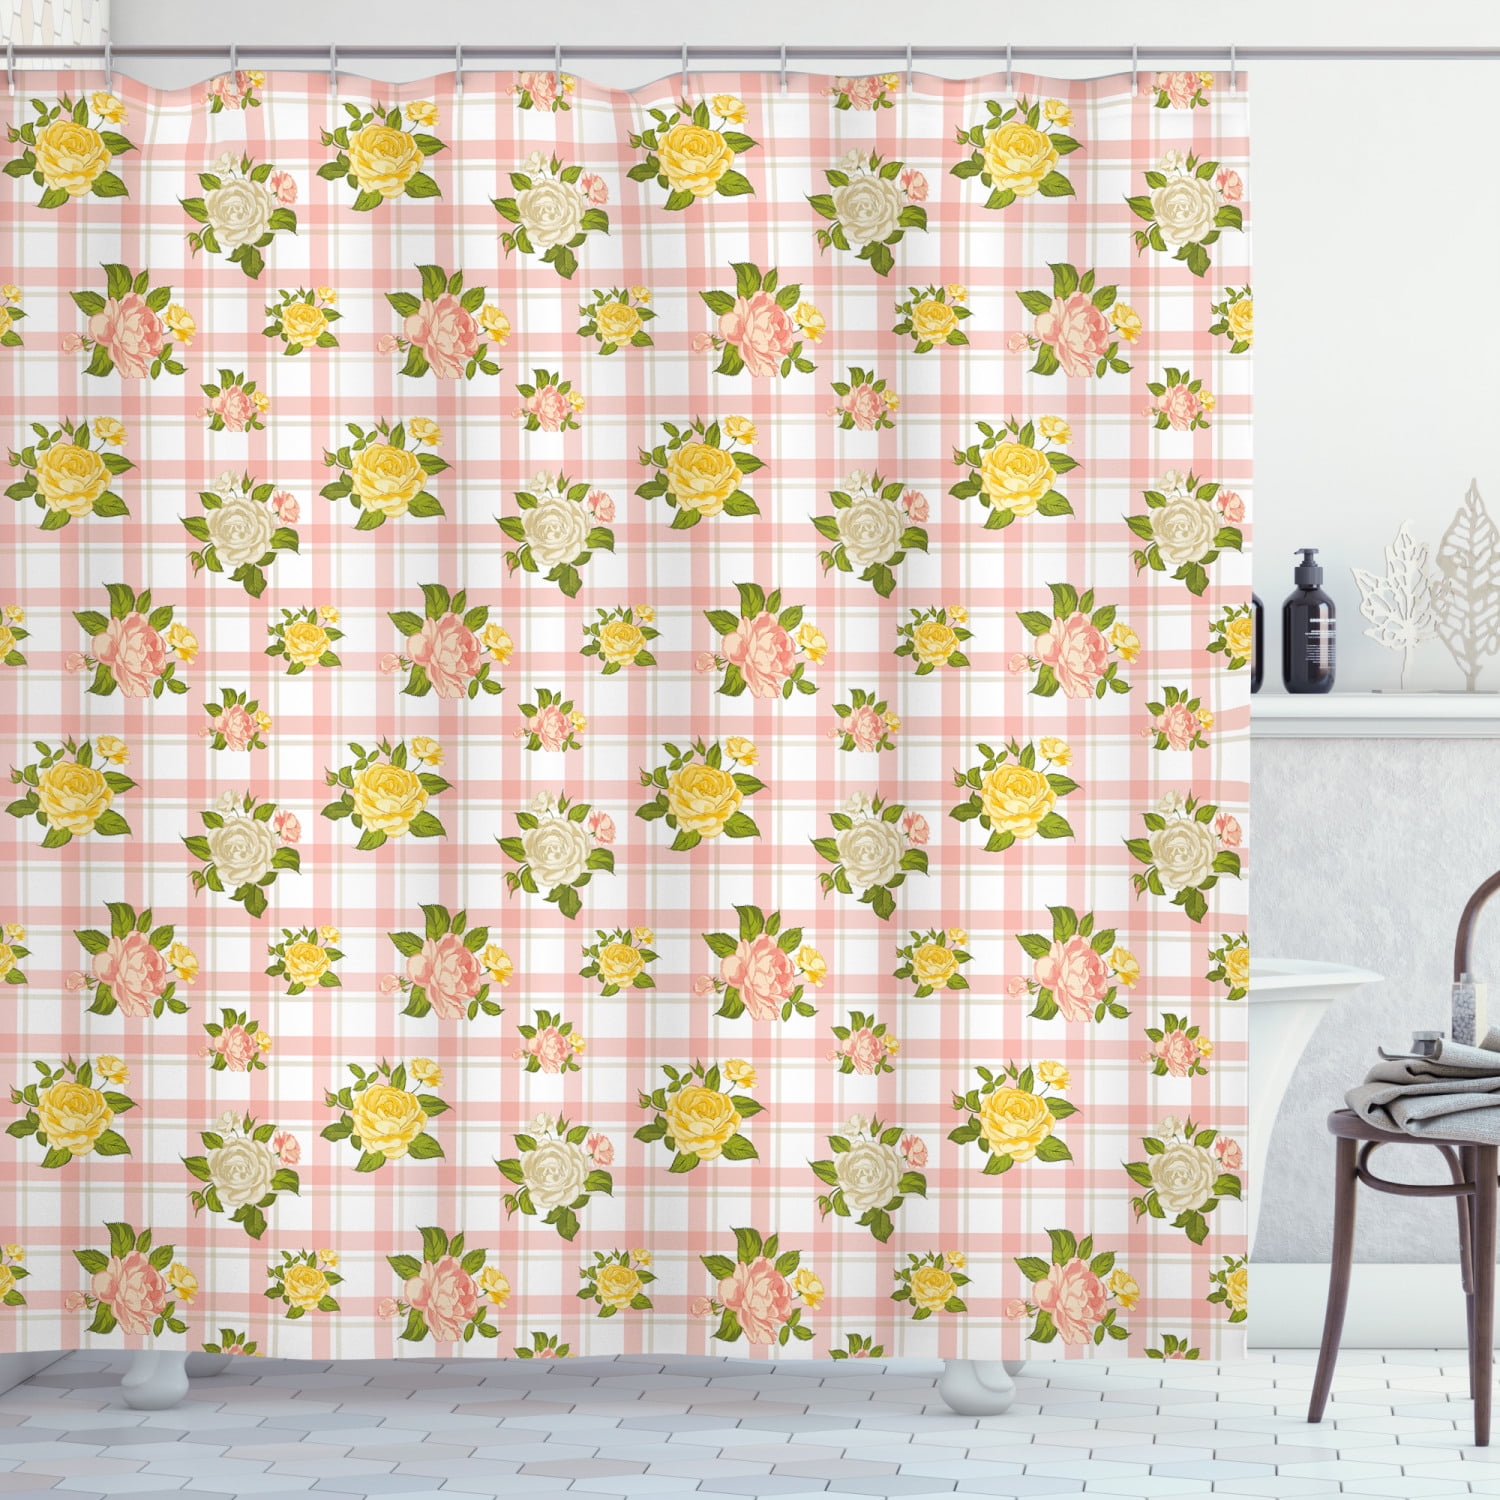 Details about   Colorful Shower Curtain Shabby Chic Roses Leaf Print for Bathroom 